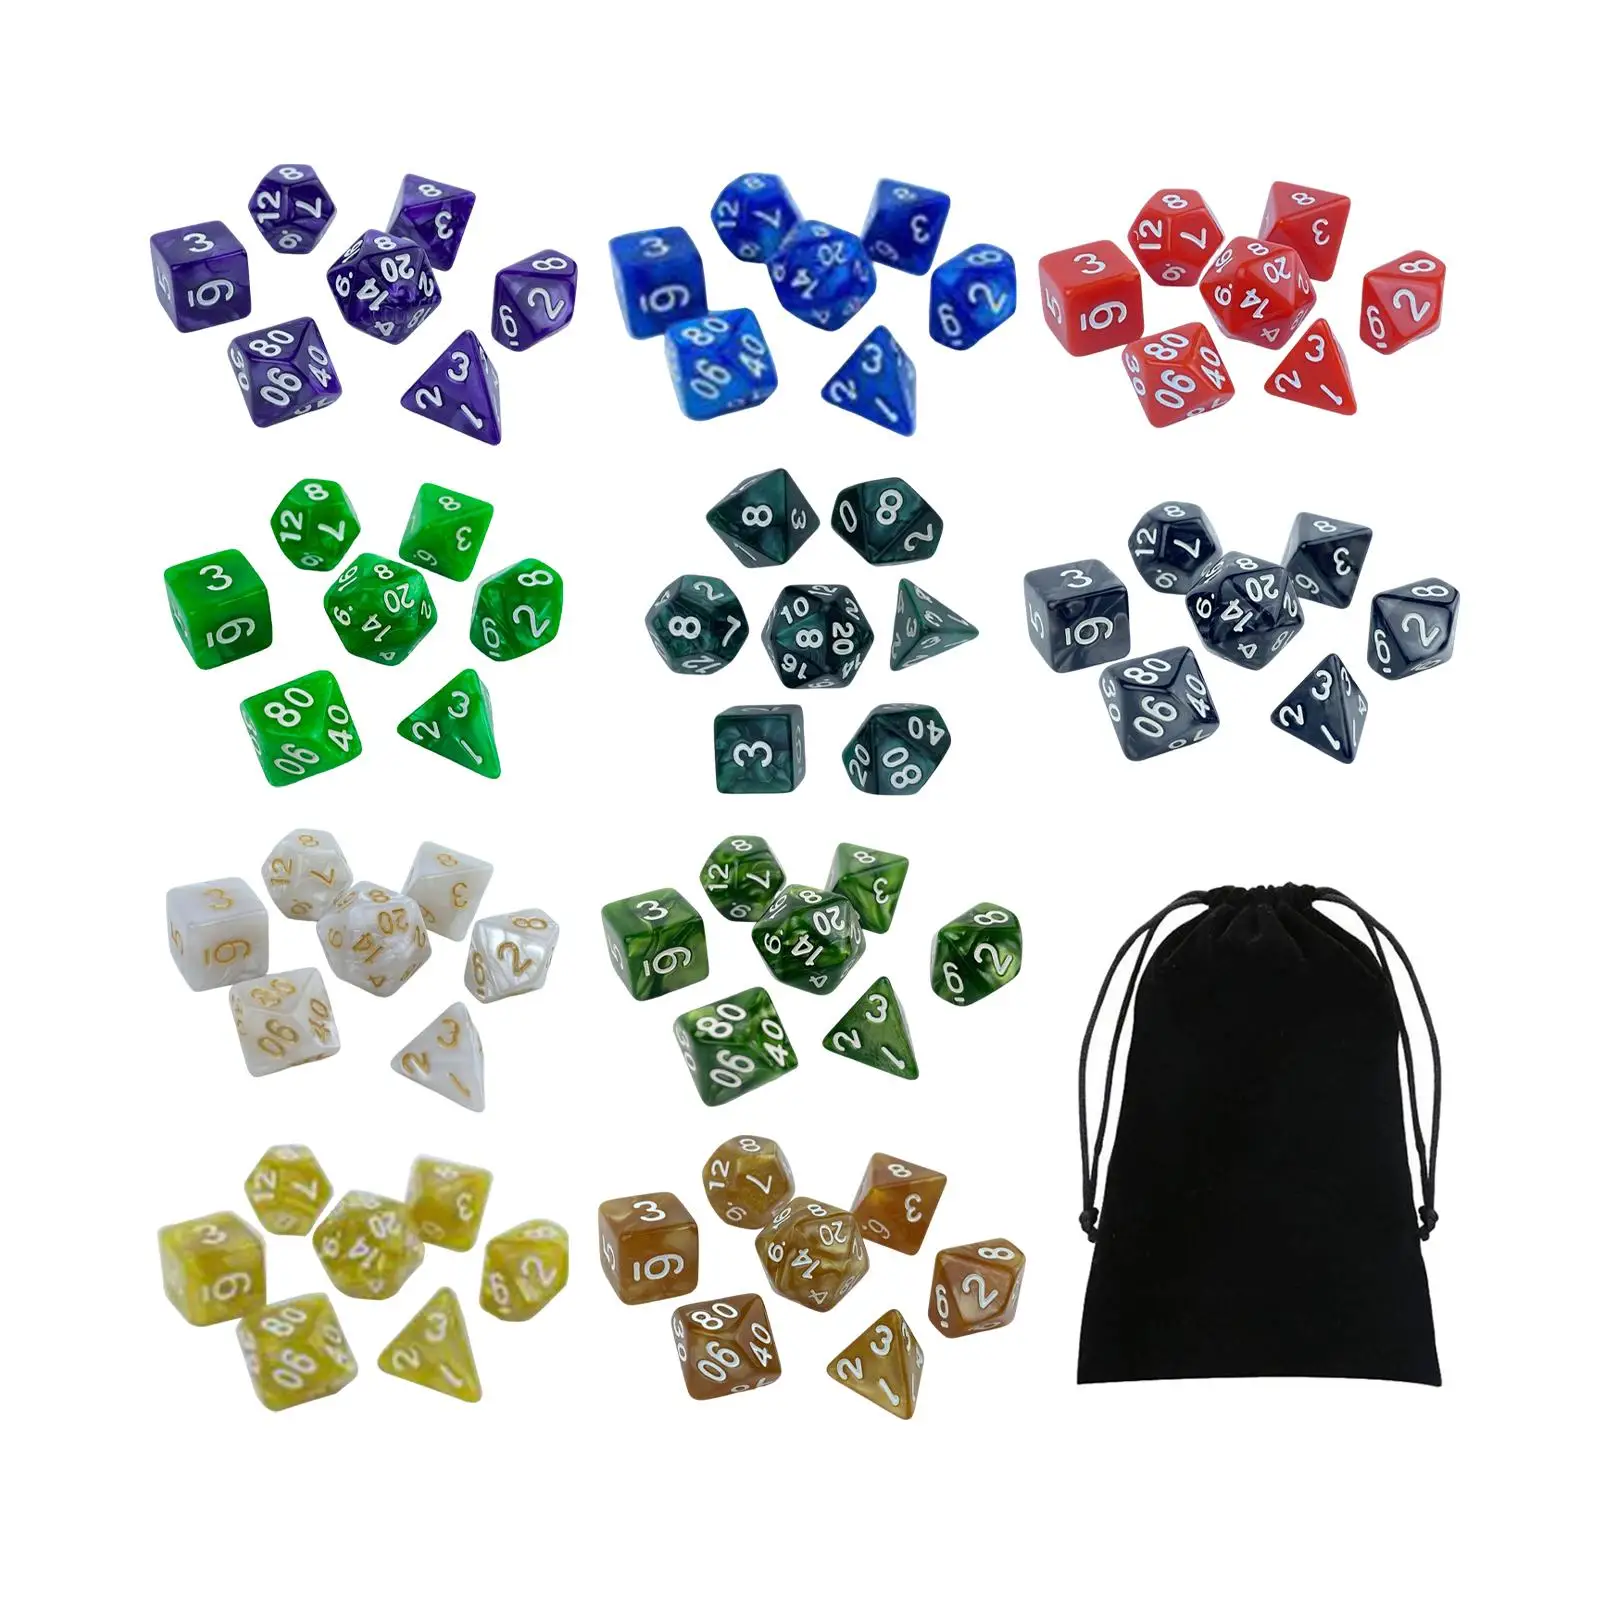  Acrylic Polyhedral Dice Set, Entertainment Toy with Storage Bag, Board